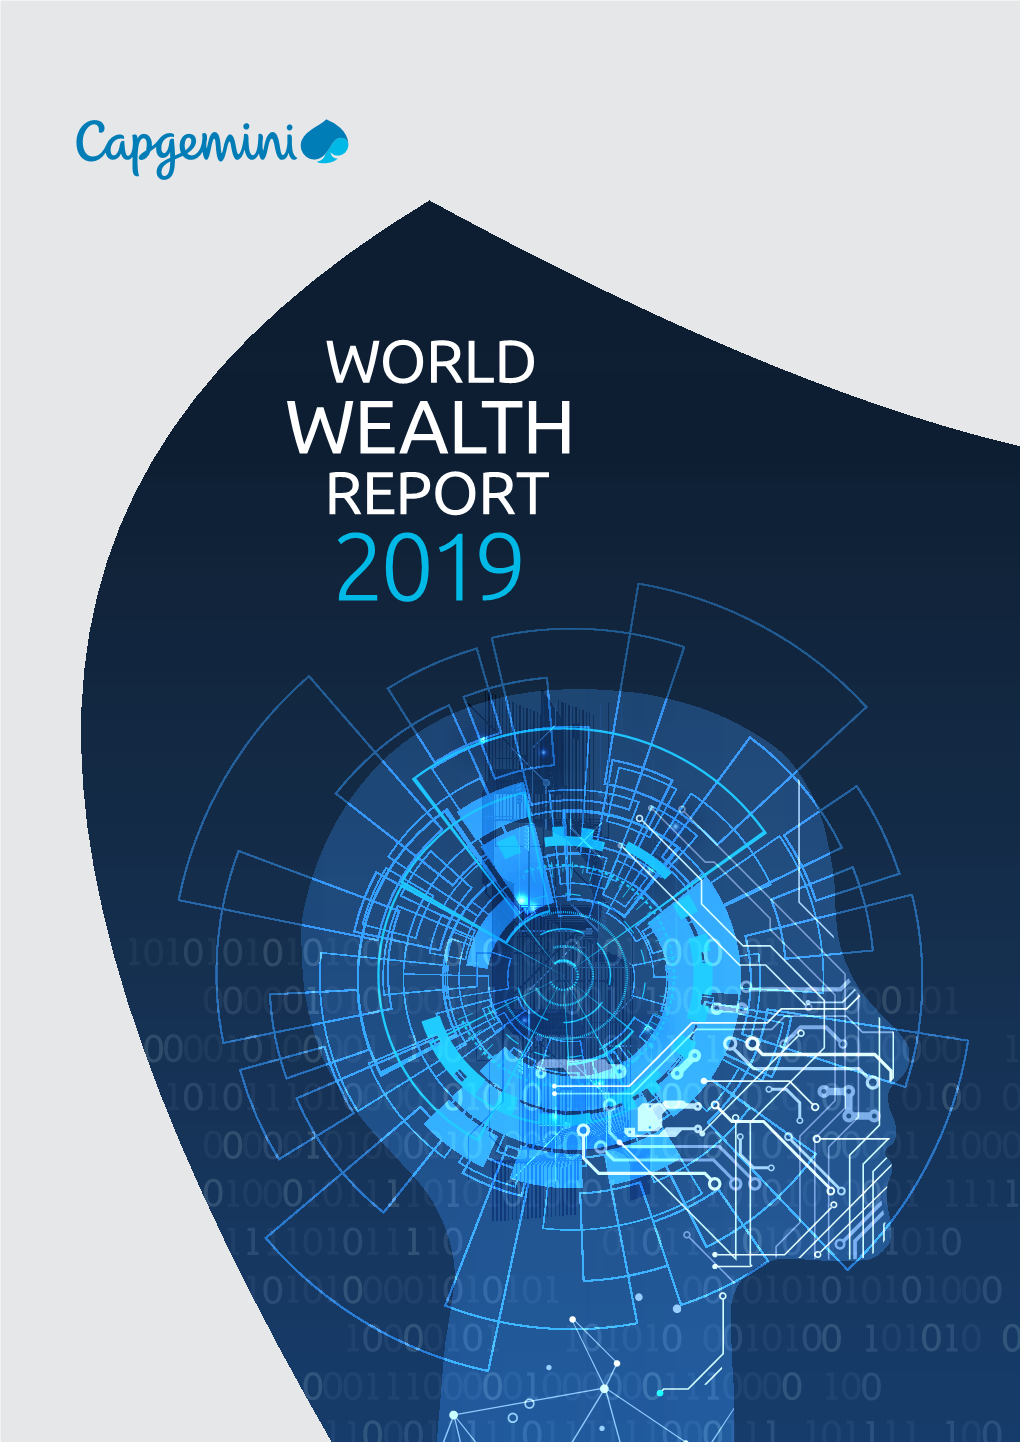 WORLD WEALTH REPORT 2019 Table of Contents